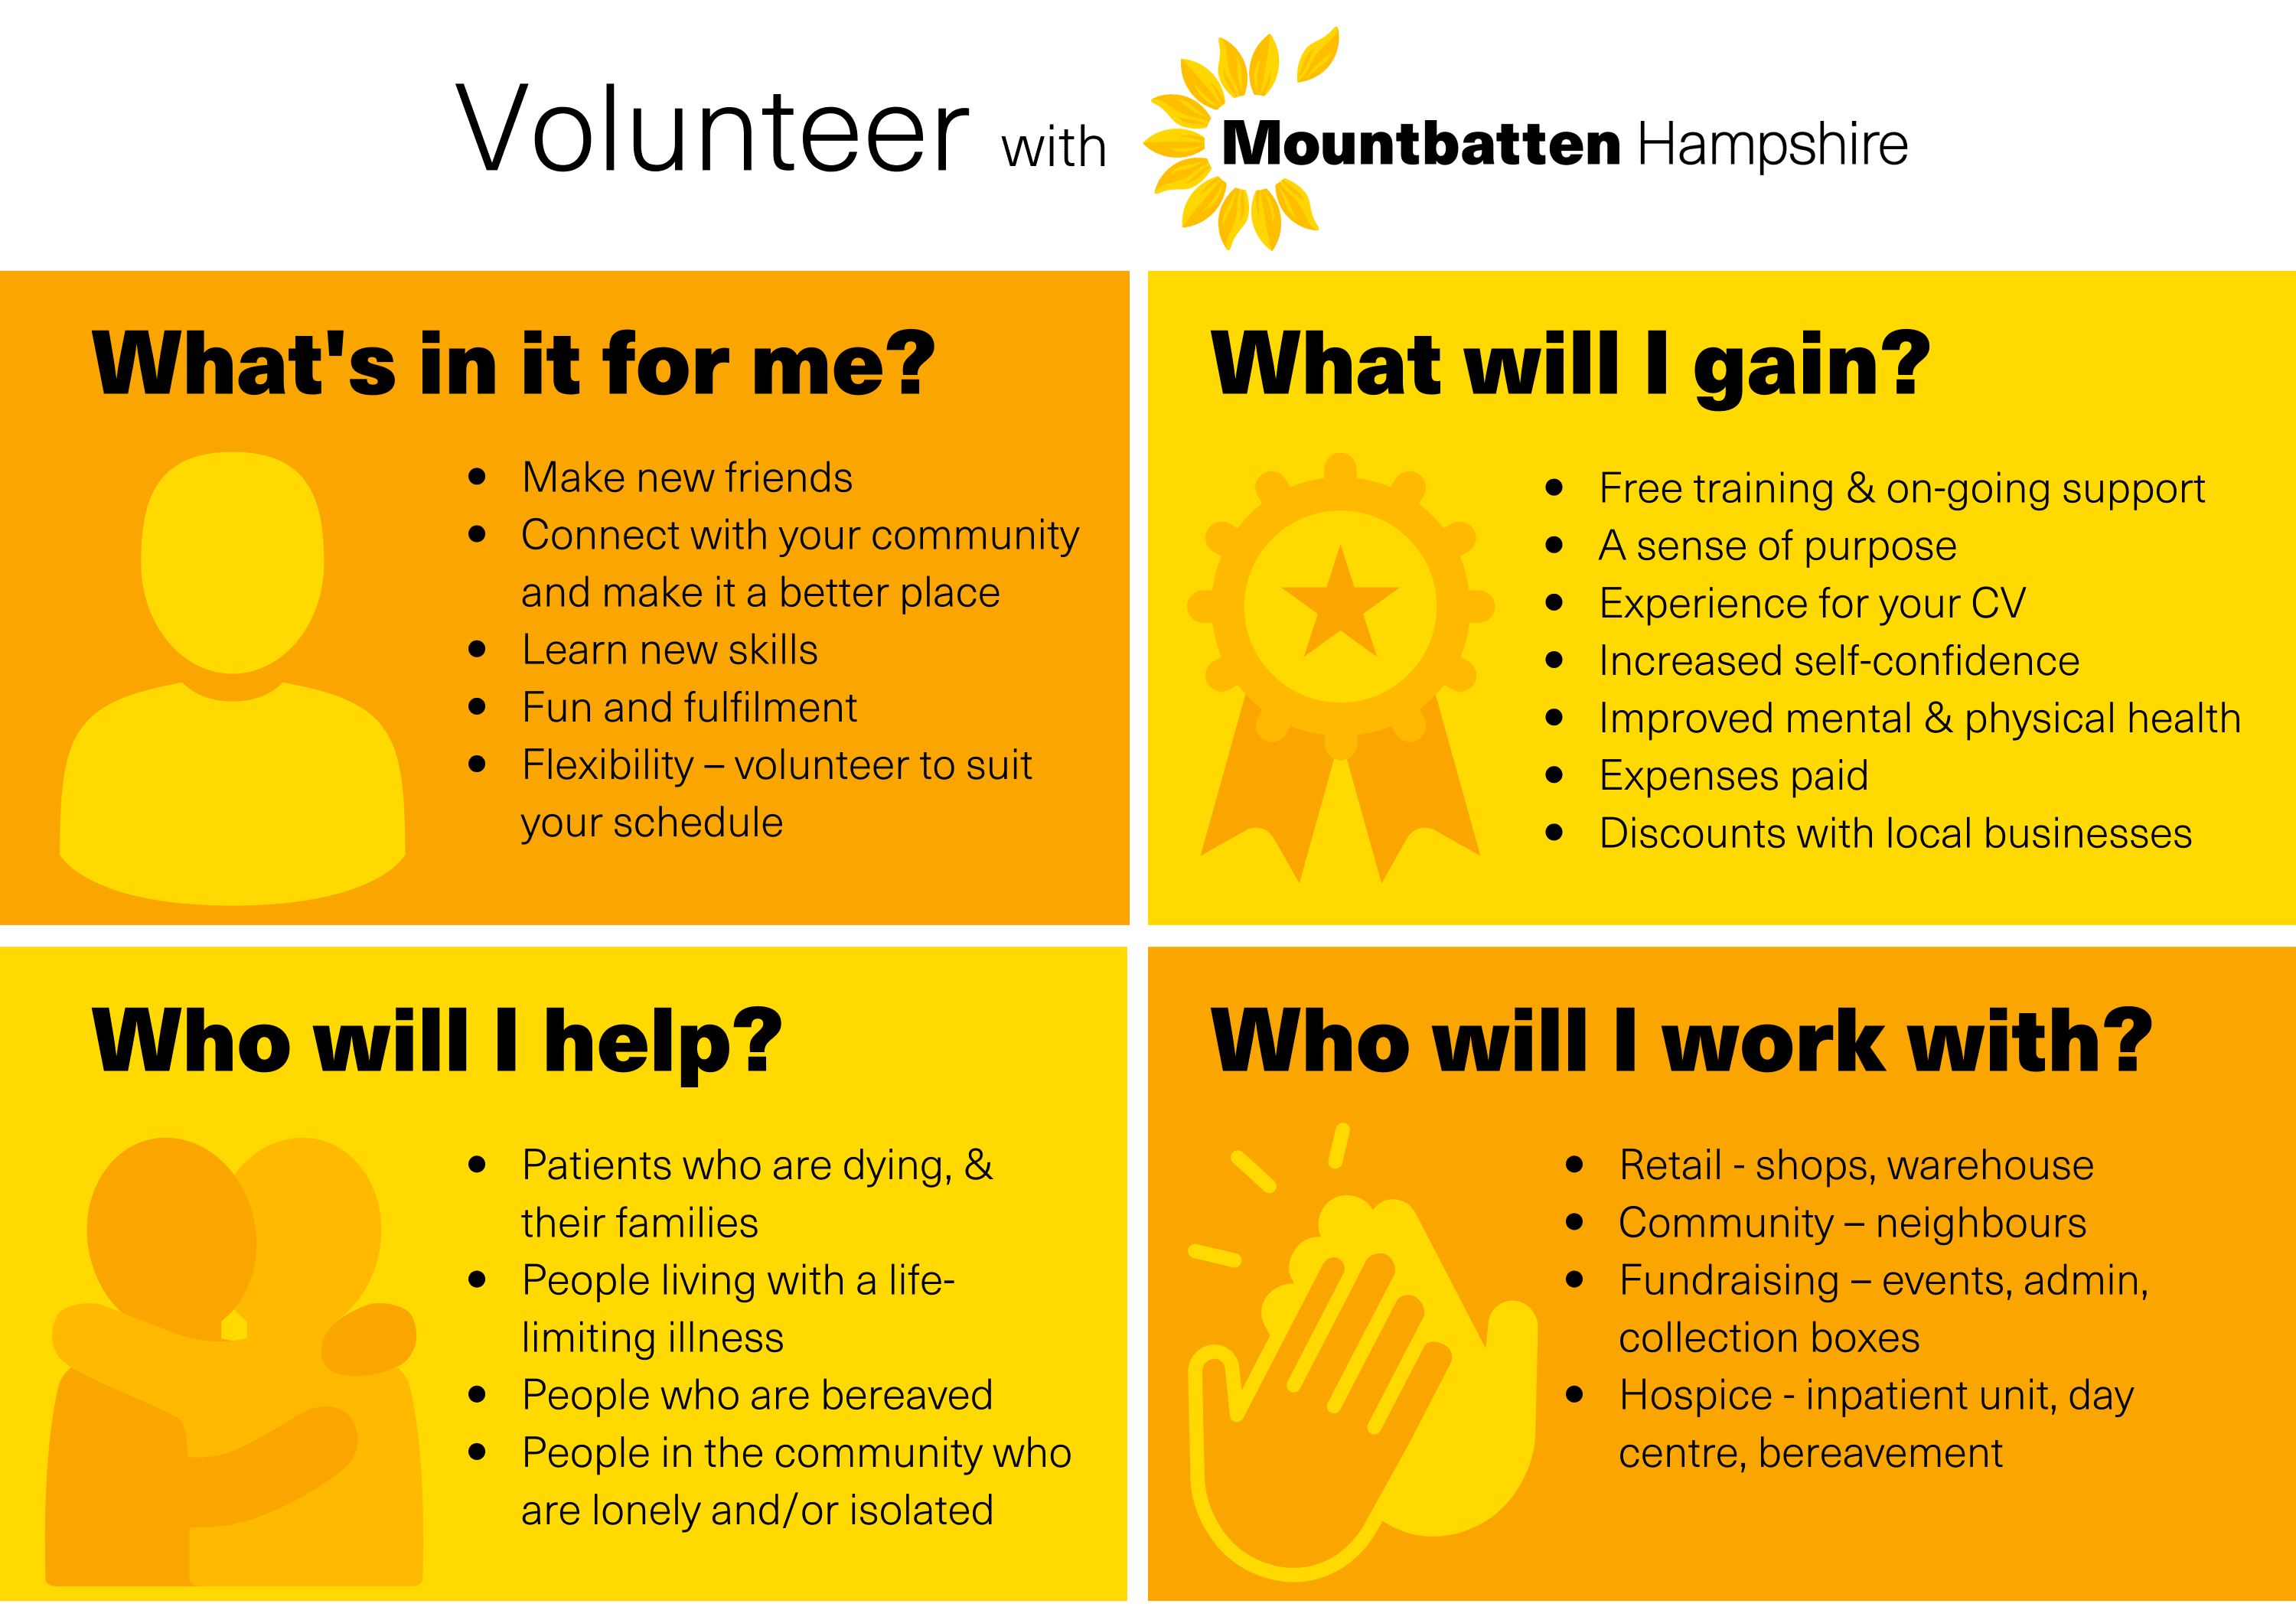 Volunteer with Mountbatten Hampshire. Whats in it for me? •	Make new friends  •	Connect with your community and make it a better place •	Learn new skills  •	Fun and fulfilment  •	Flexibility – volunteer to suit your schedule. What will I gain? •	Free